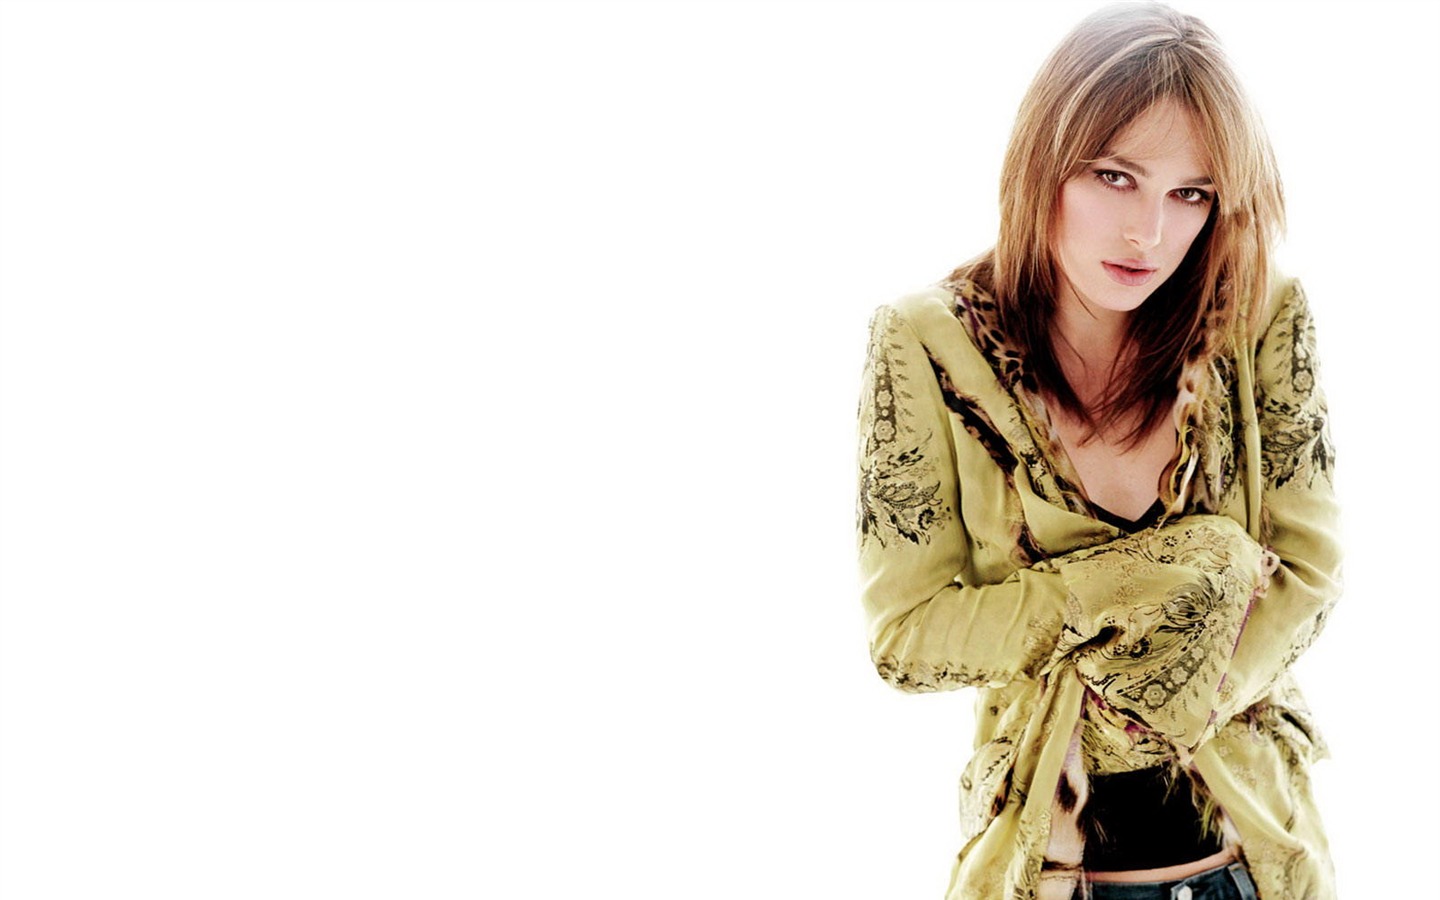 Keira Knightley #047 - 1440x900 Wallpapers Pictures Photos Images